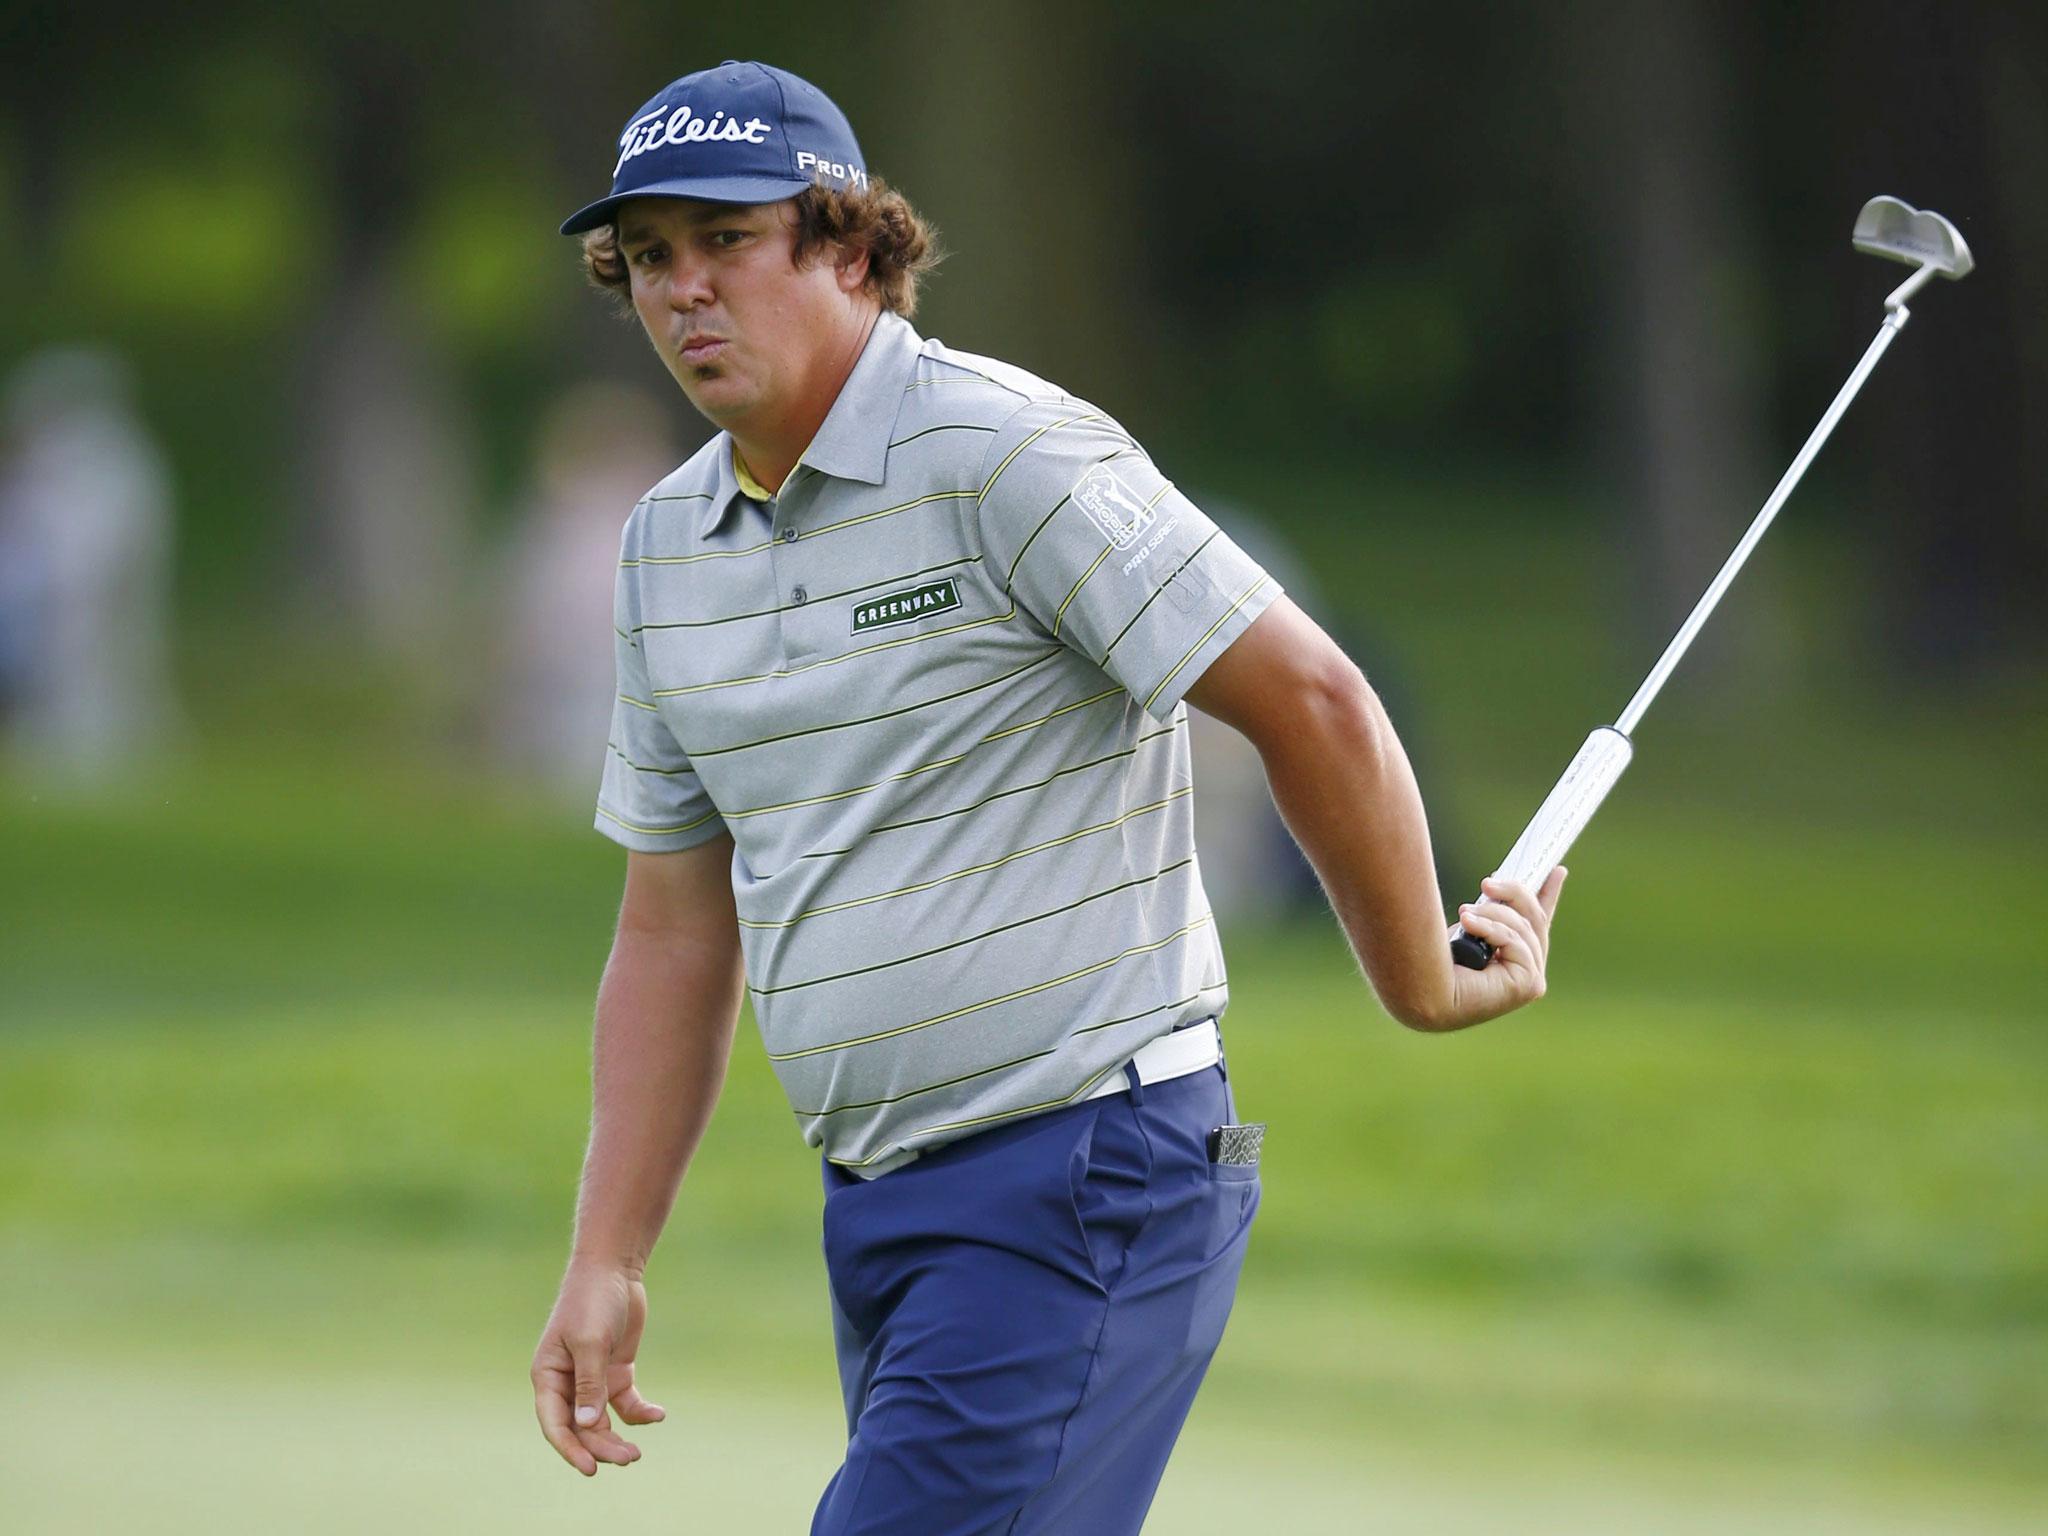 Jason Dufner reacts after missing his putt on the 17th green